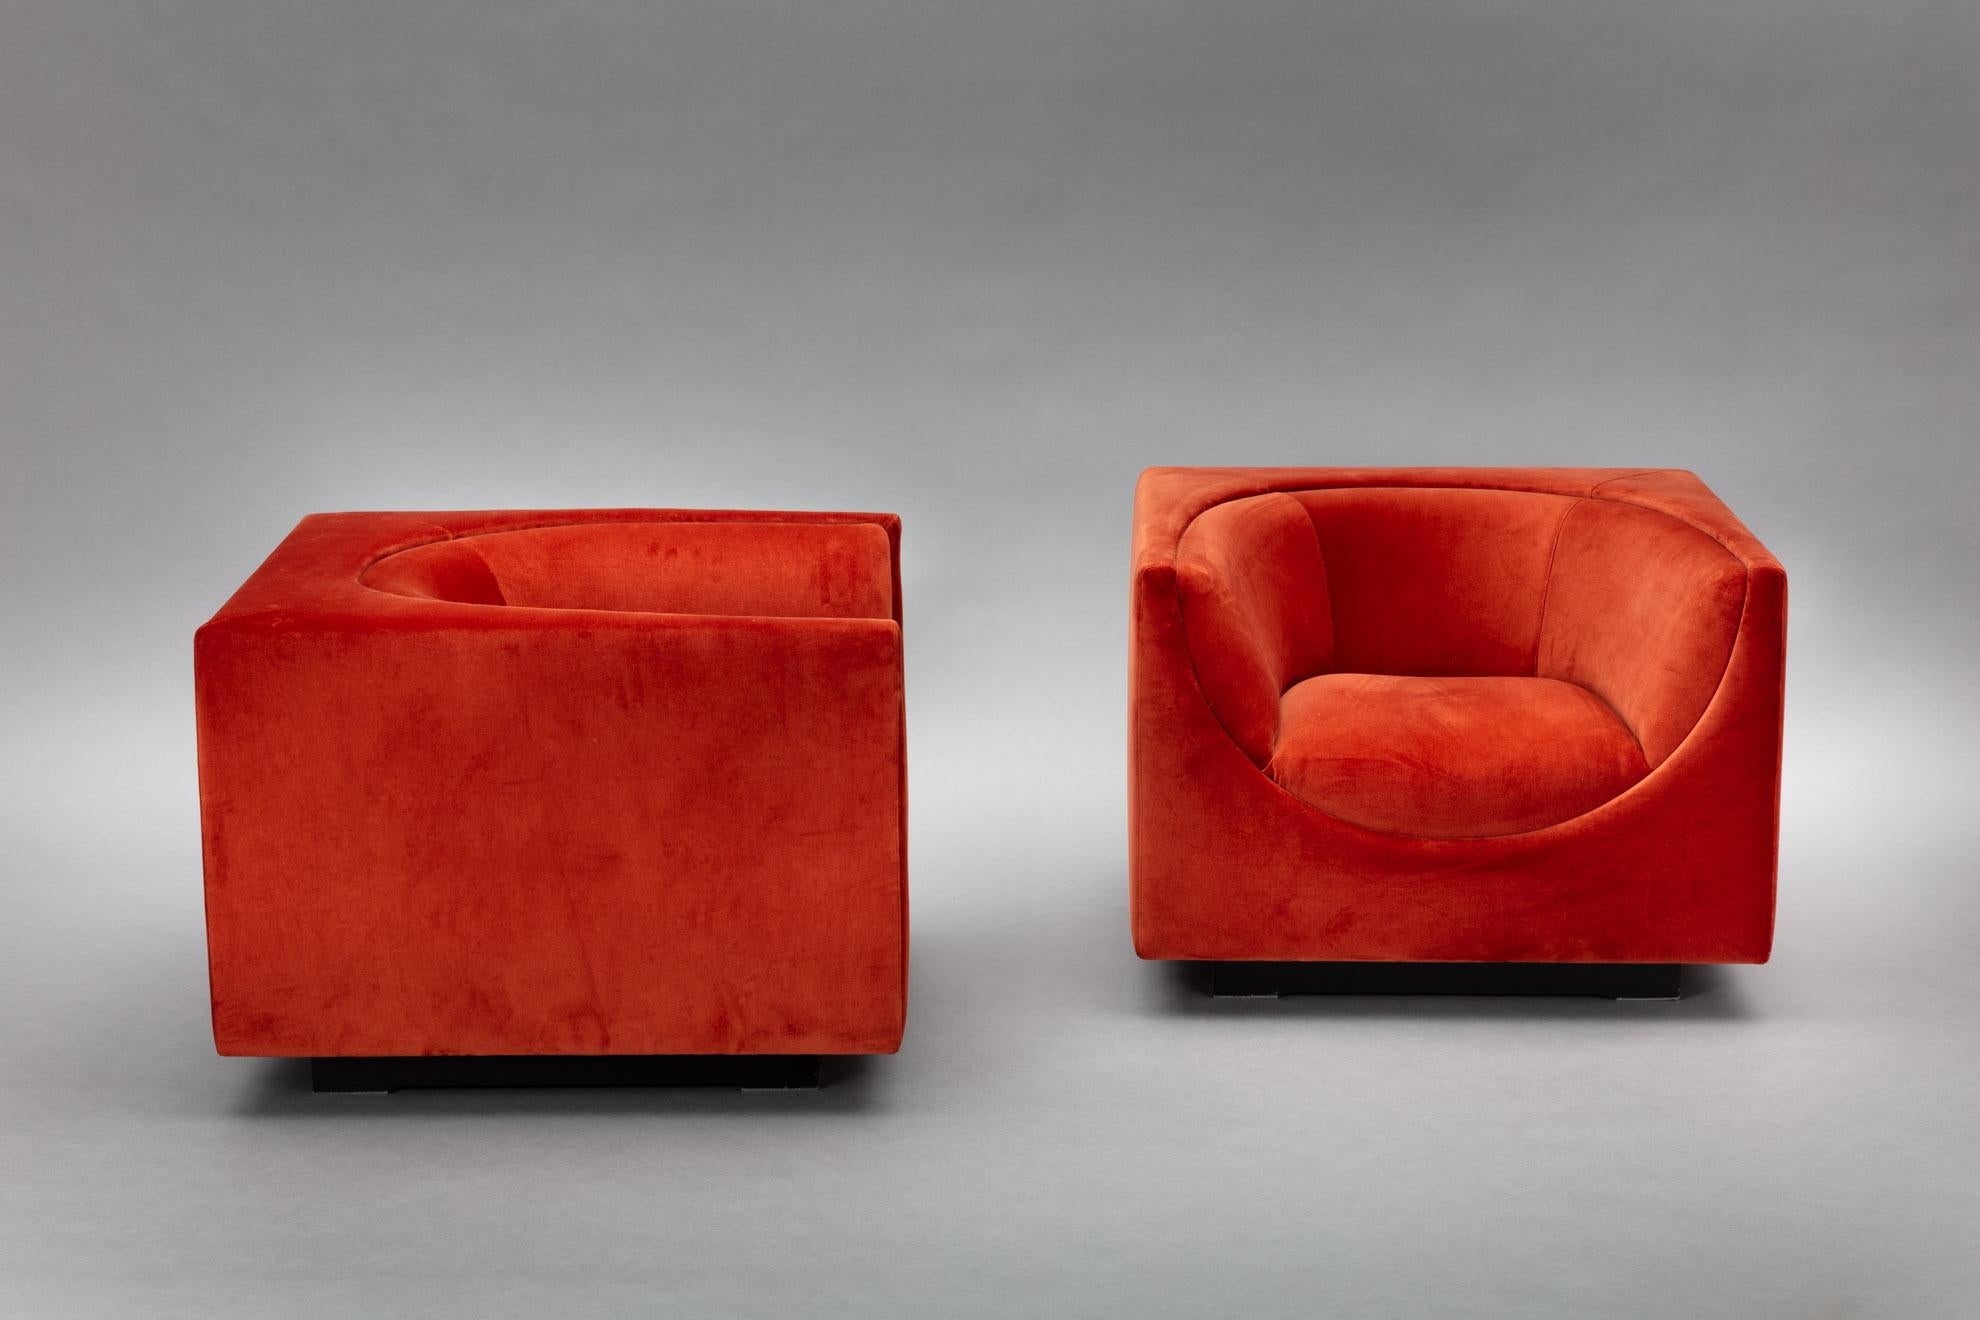 These 1970s Cubo chairs take cuboid forms and scoop out their core. They were designed by Jorge Zalszupin. He was Polish but moved to Brazil, having been inspired by the works of Brazilians Oscar Niemeyer and Roberto Burle Marx.

Post World War II